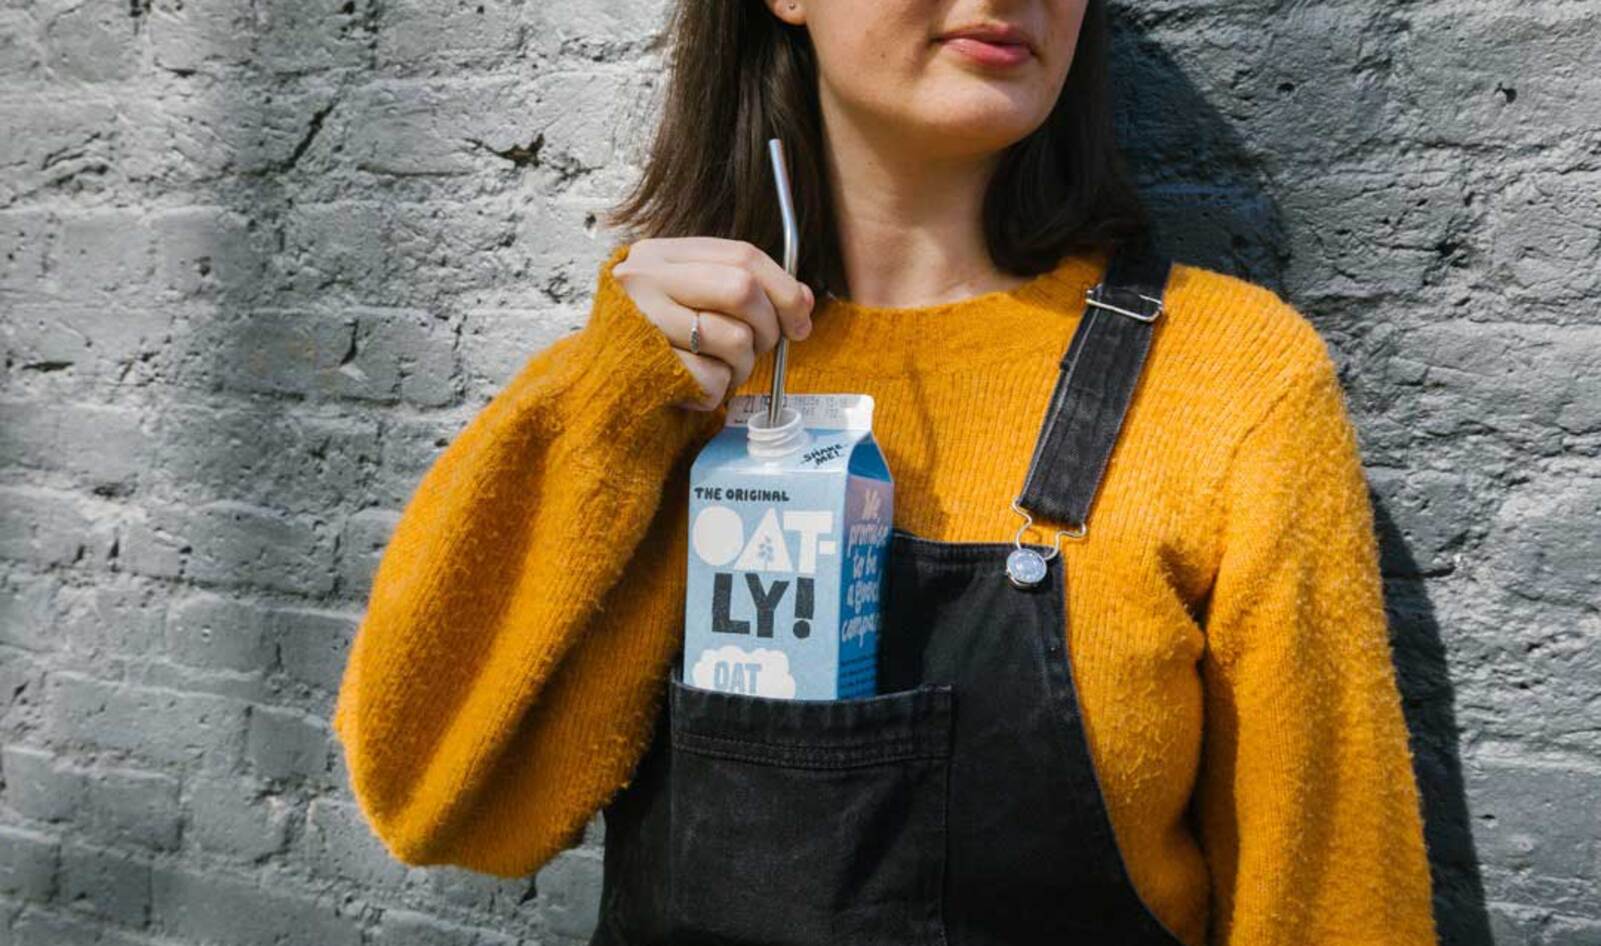 Vegan Brand Oatly Becomes Even More Sustainable by Switching to Electric Transport Vehicles